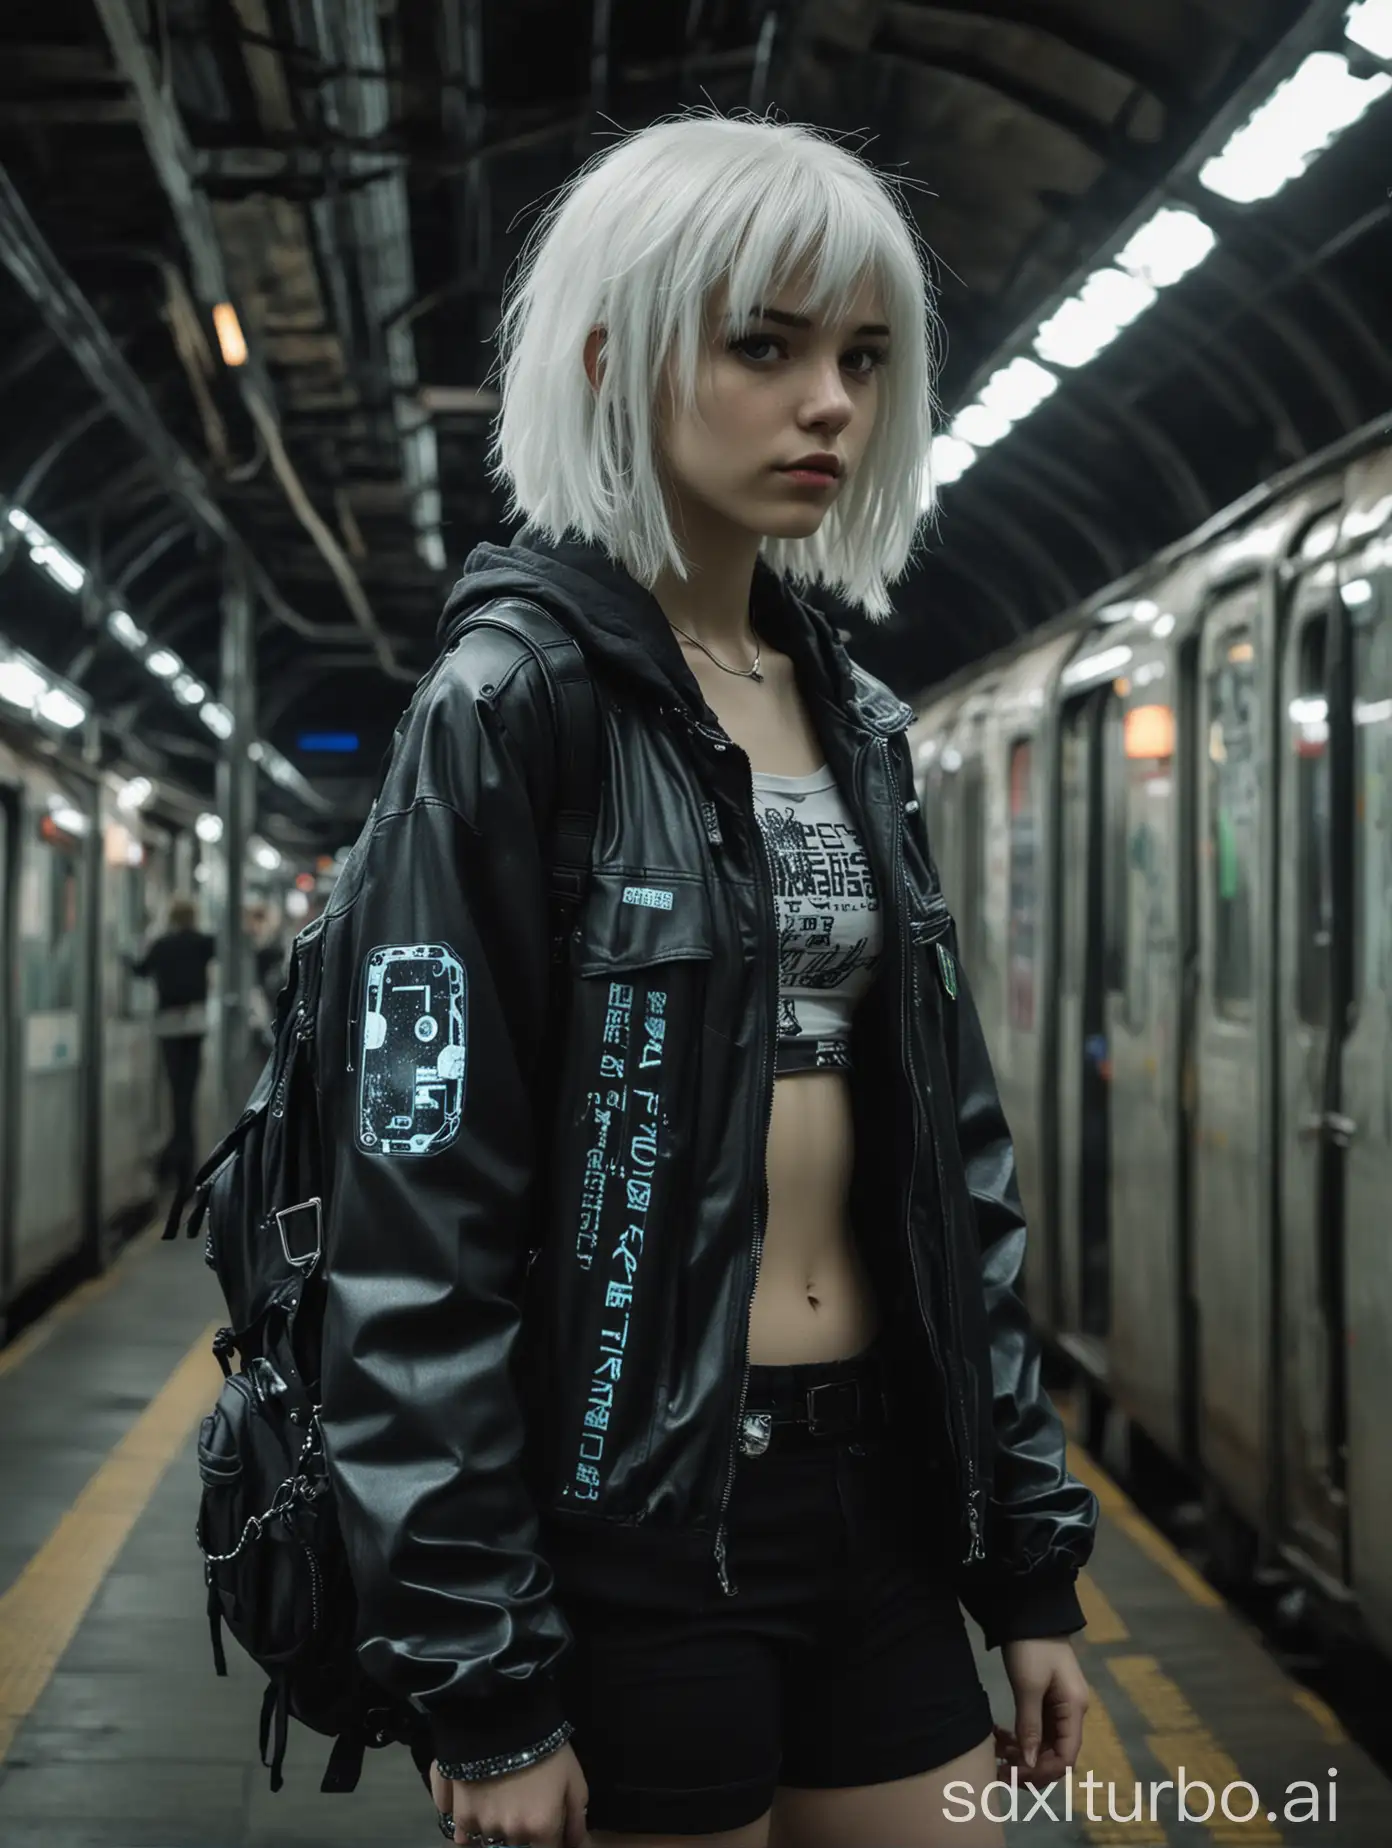 teen femboy hacker, white hair, outfit with bioluminescent details,  jacket over crop top, backpack, dystopian cyberpunk subway station, low light, dark shadows